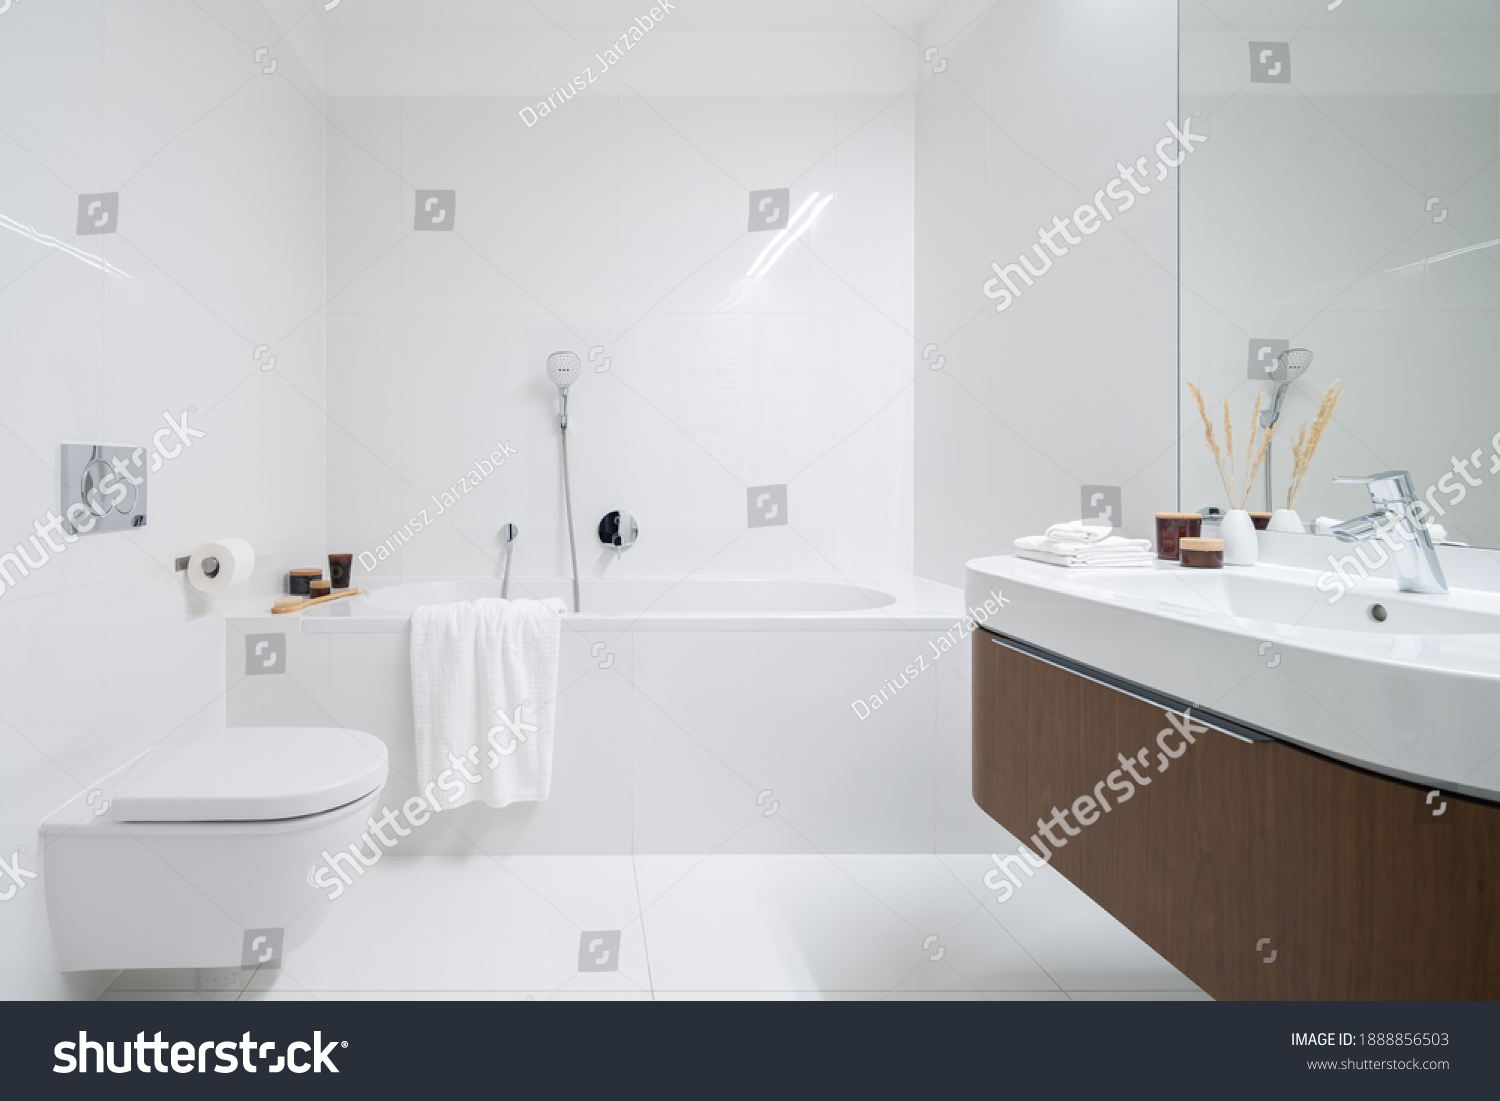 Spacious and elegant bathroom with big bathtub, white tiles, washbasin with wooden cabinet with drawer and big mirror #1888856503